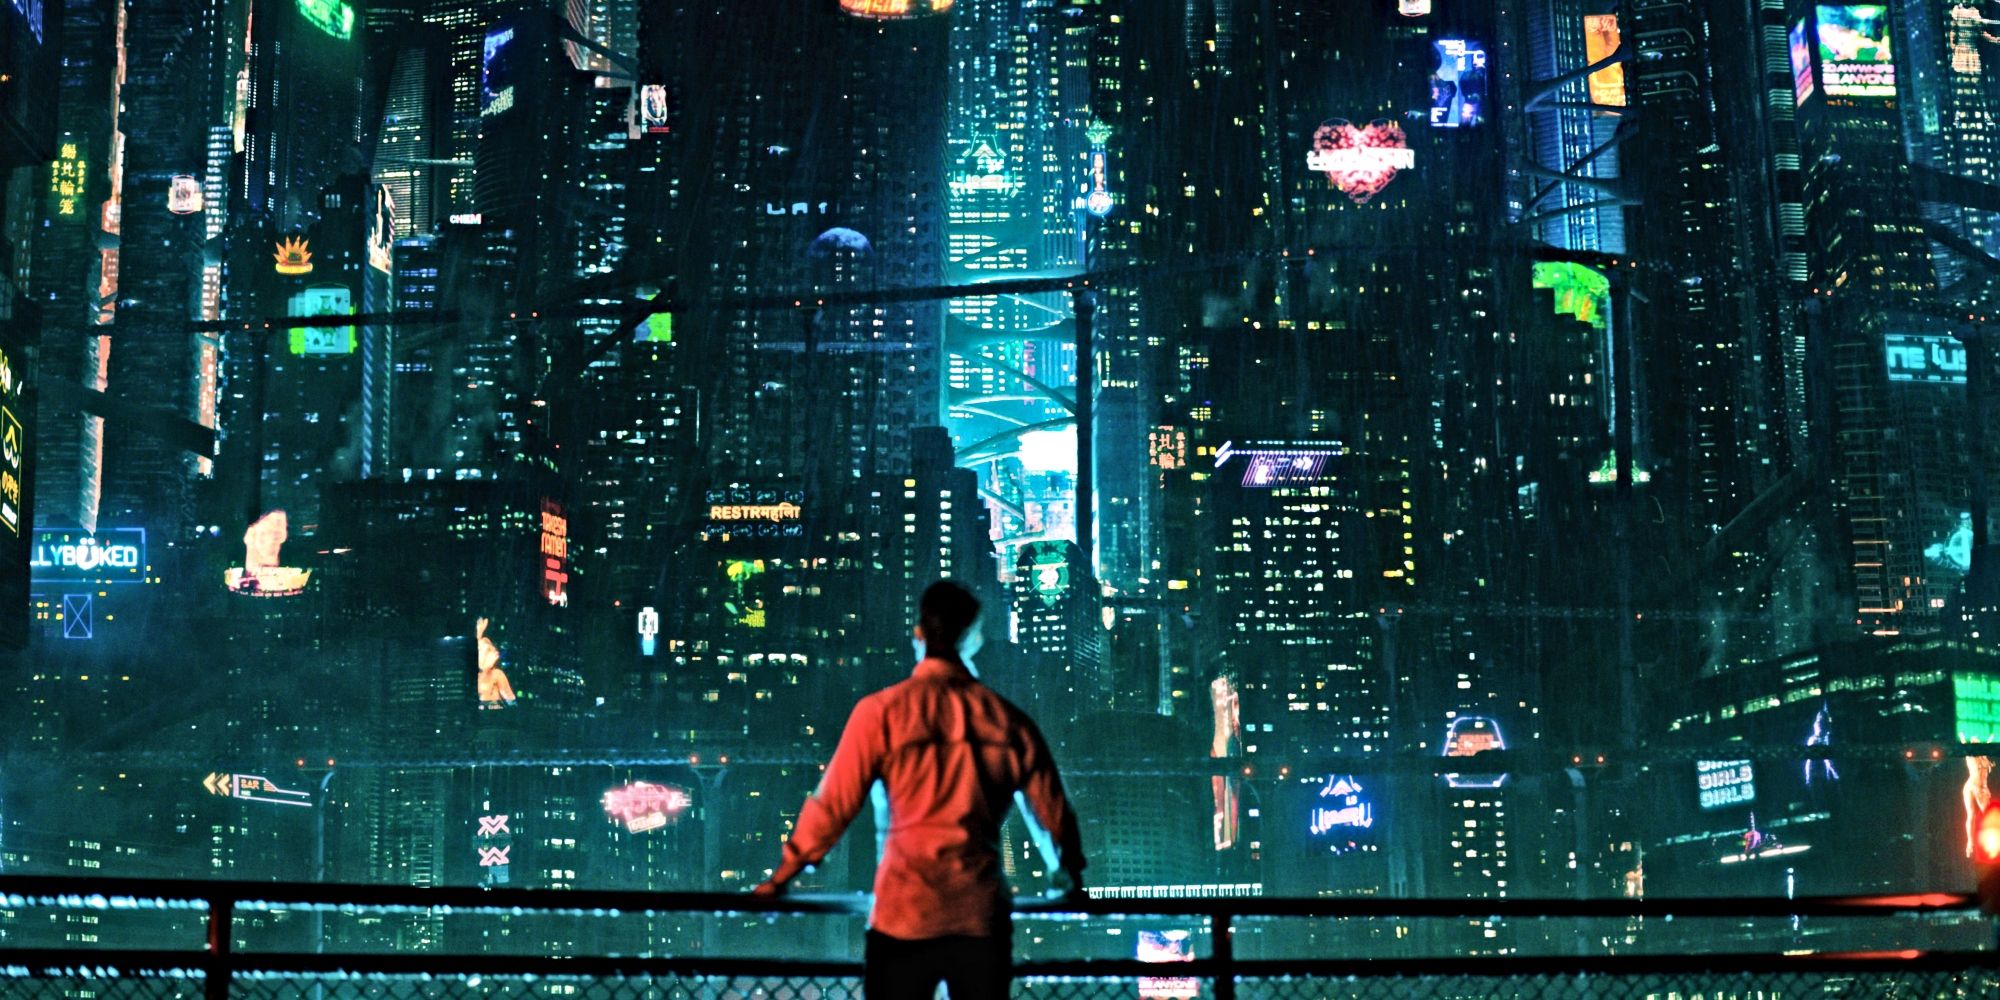 Altered Carbon season 2 cast: Who is in the cast of 